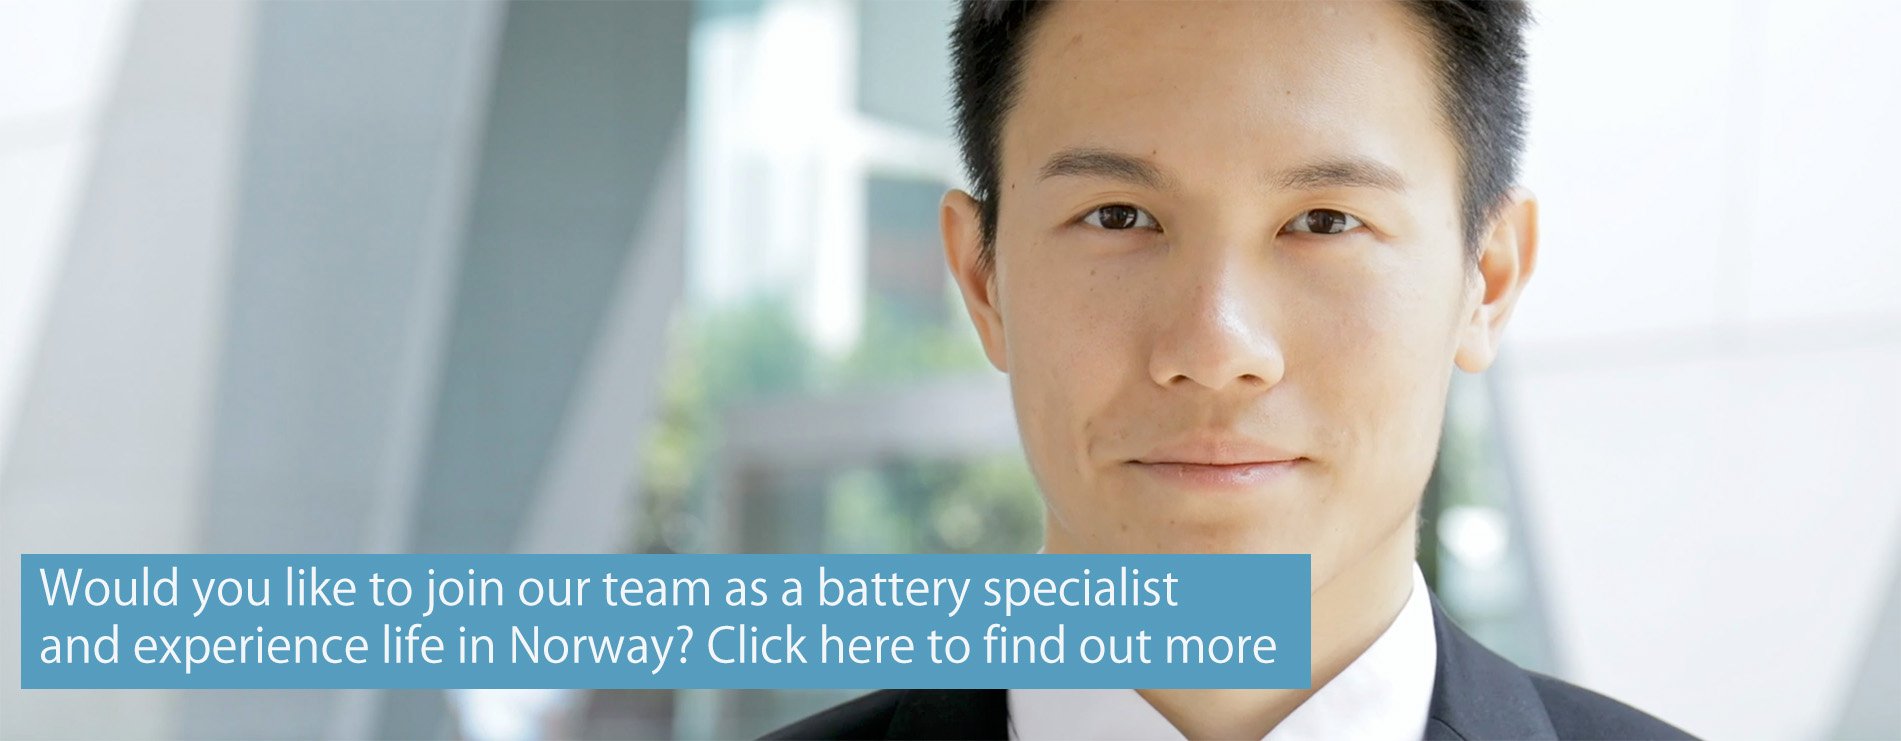 Would you like to join our team as a battery specialist and experience life in Norway?